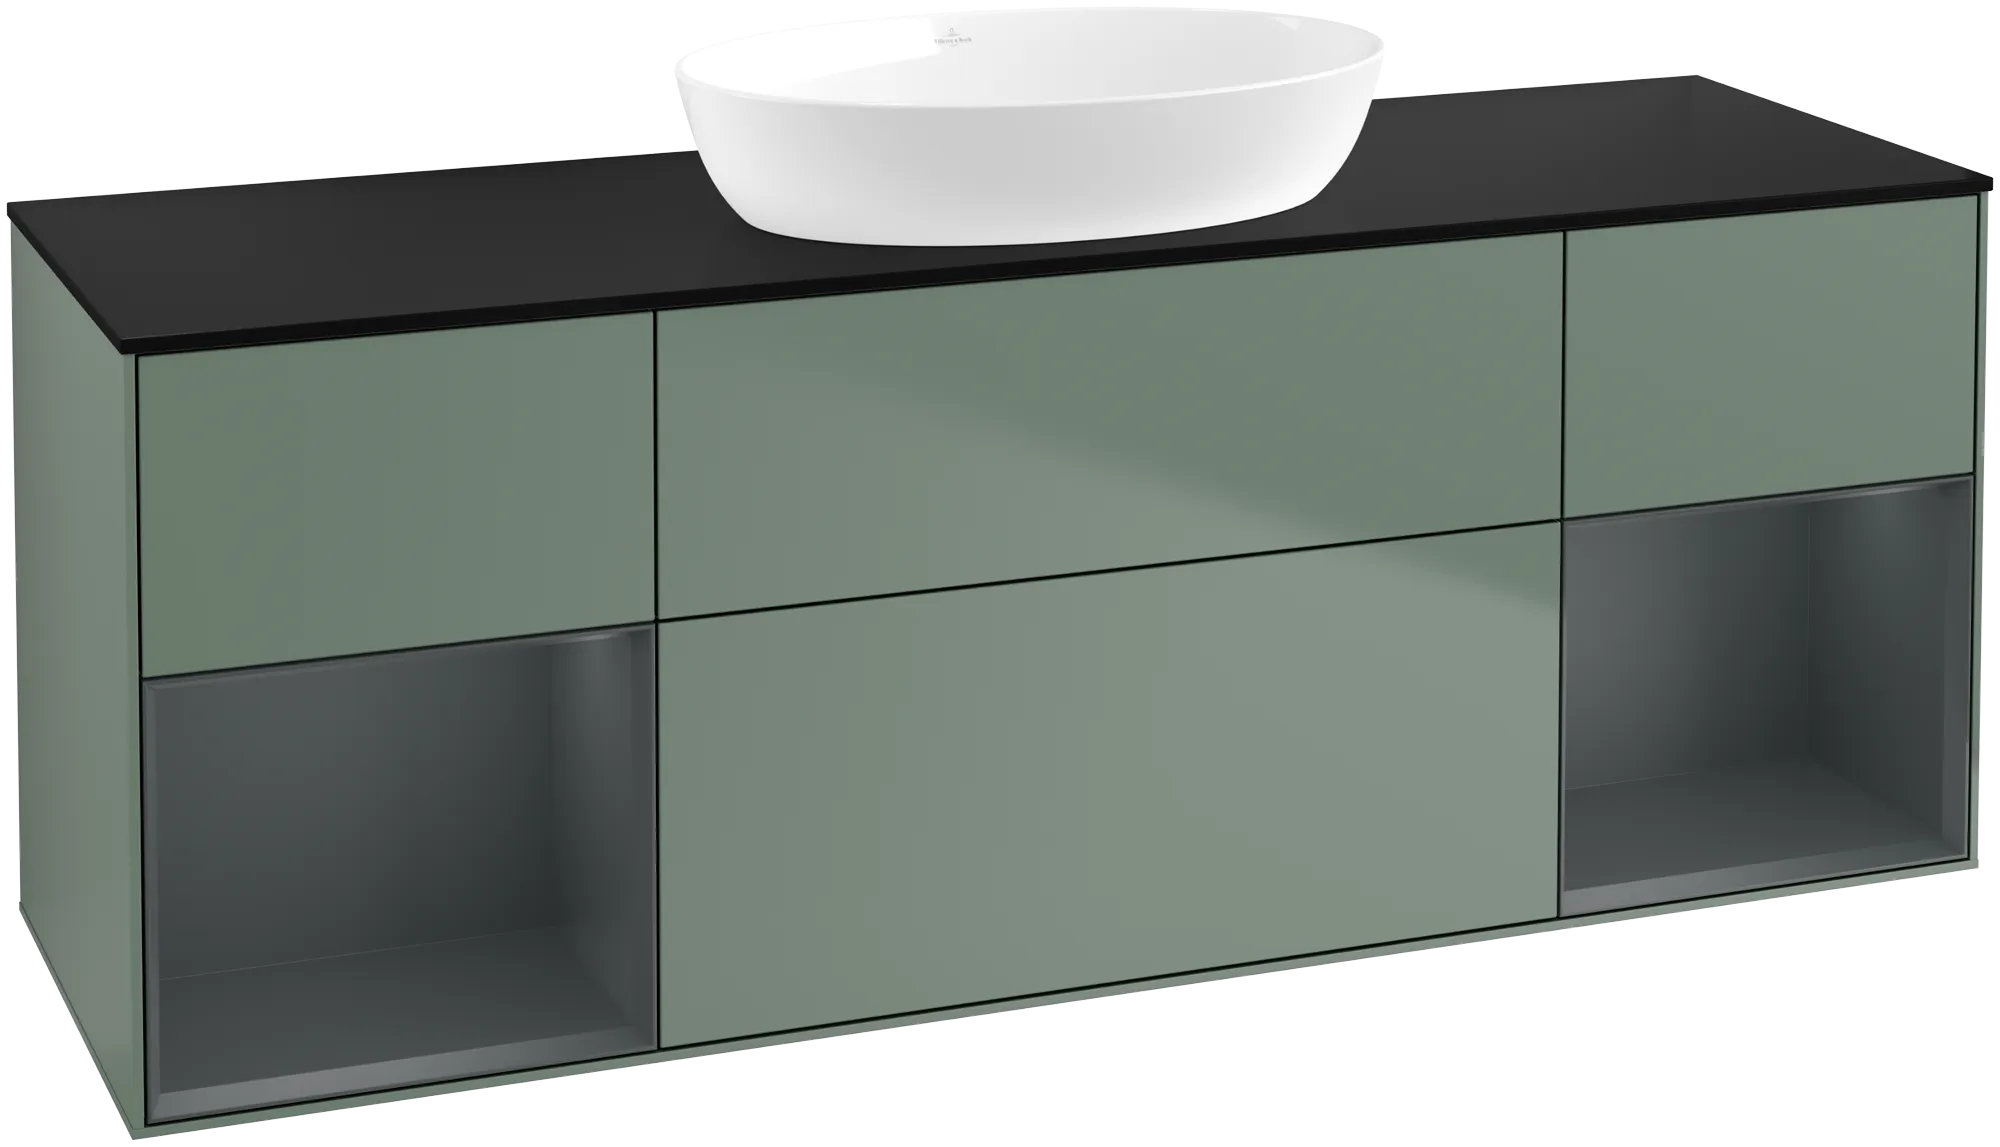 Picture of VILLEROY BOCH Finion Vanity unit, with lighting, 4 pull-out compartments, 1600 x 603 x 501 mm, Olive Matt Lacquer / Midnight Blue Matt Lacquer / Glass Black Matt #GD02HGGM